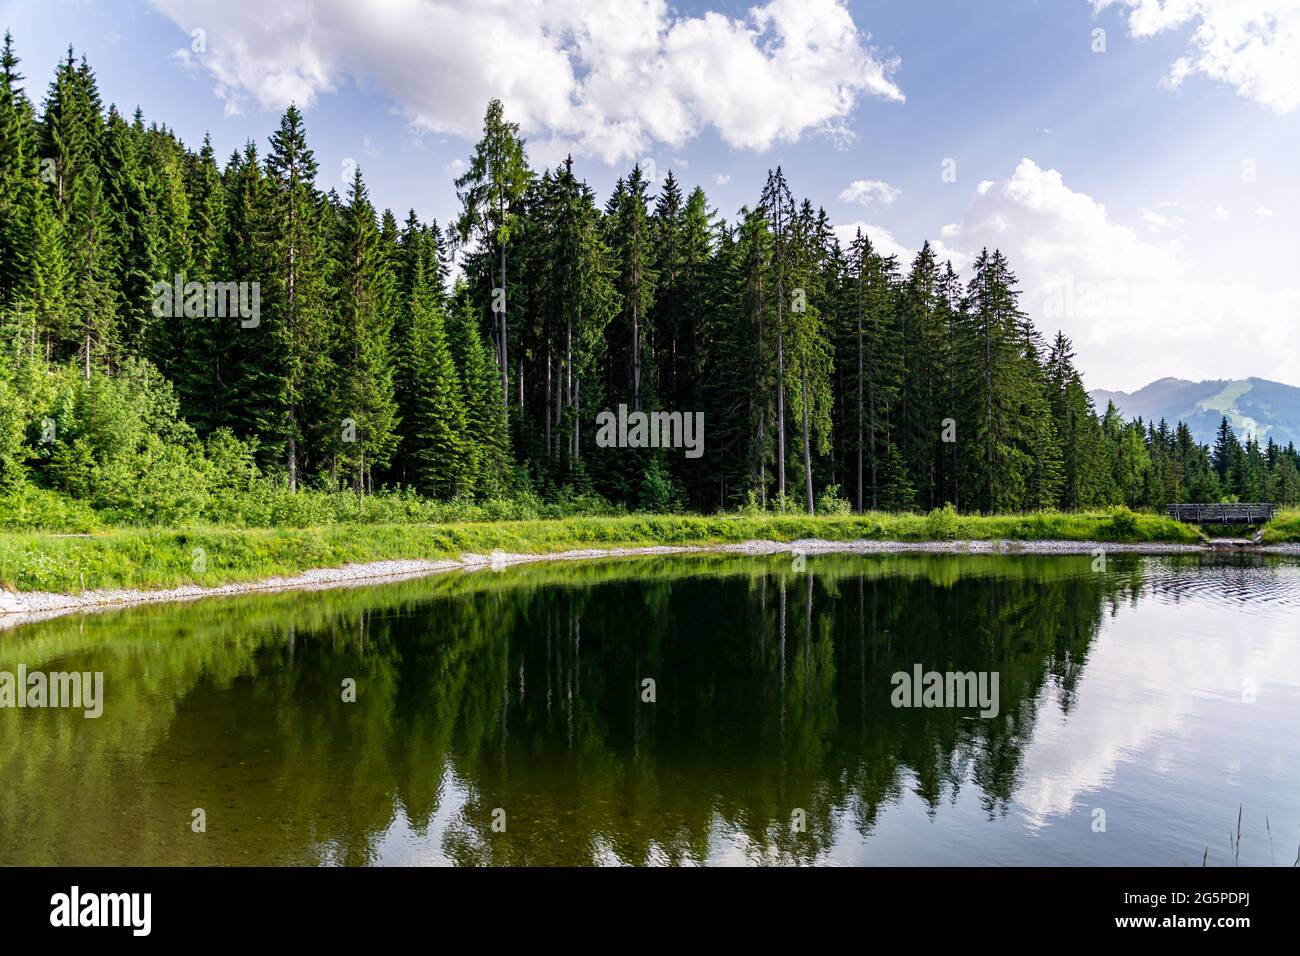 Small alpine lake reflecting the surrounding trees and green grass in a mountain landscape Stock Photo